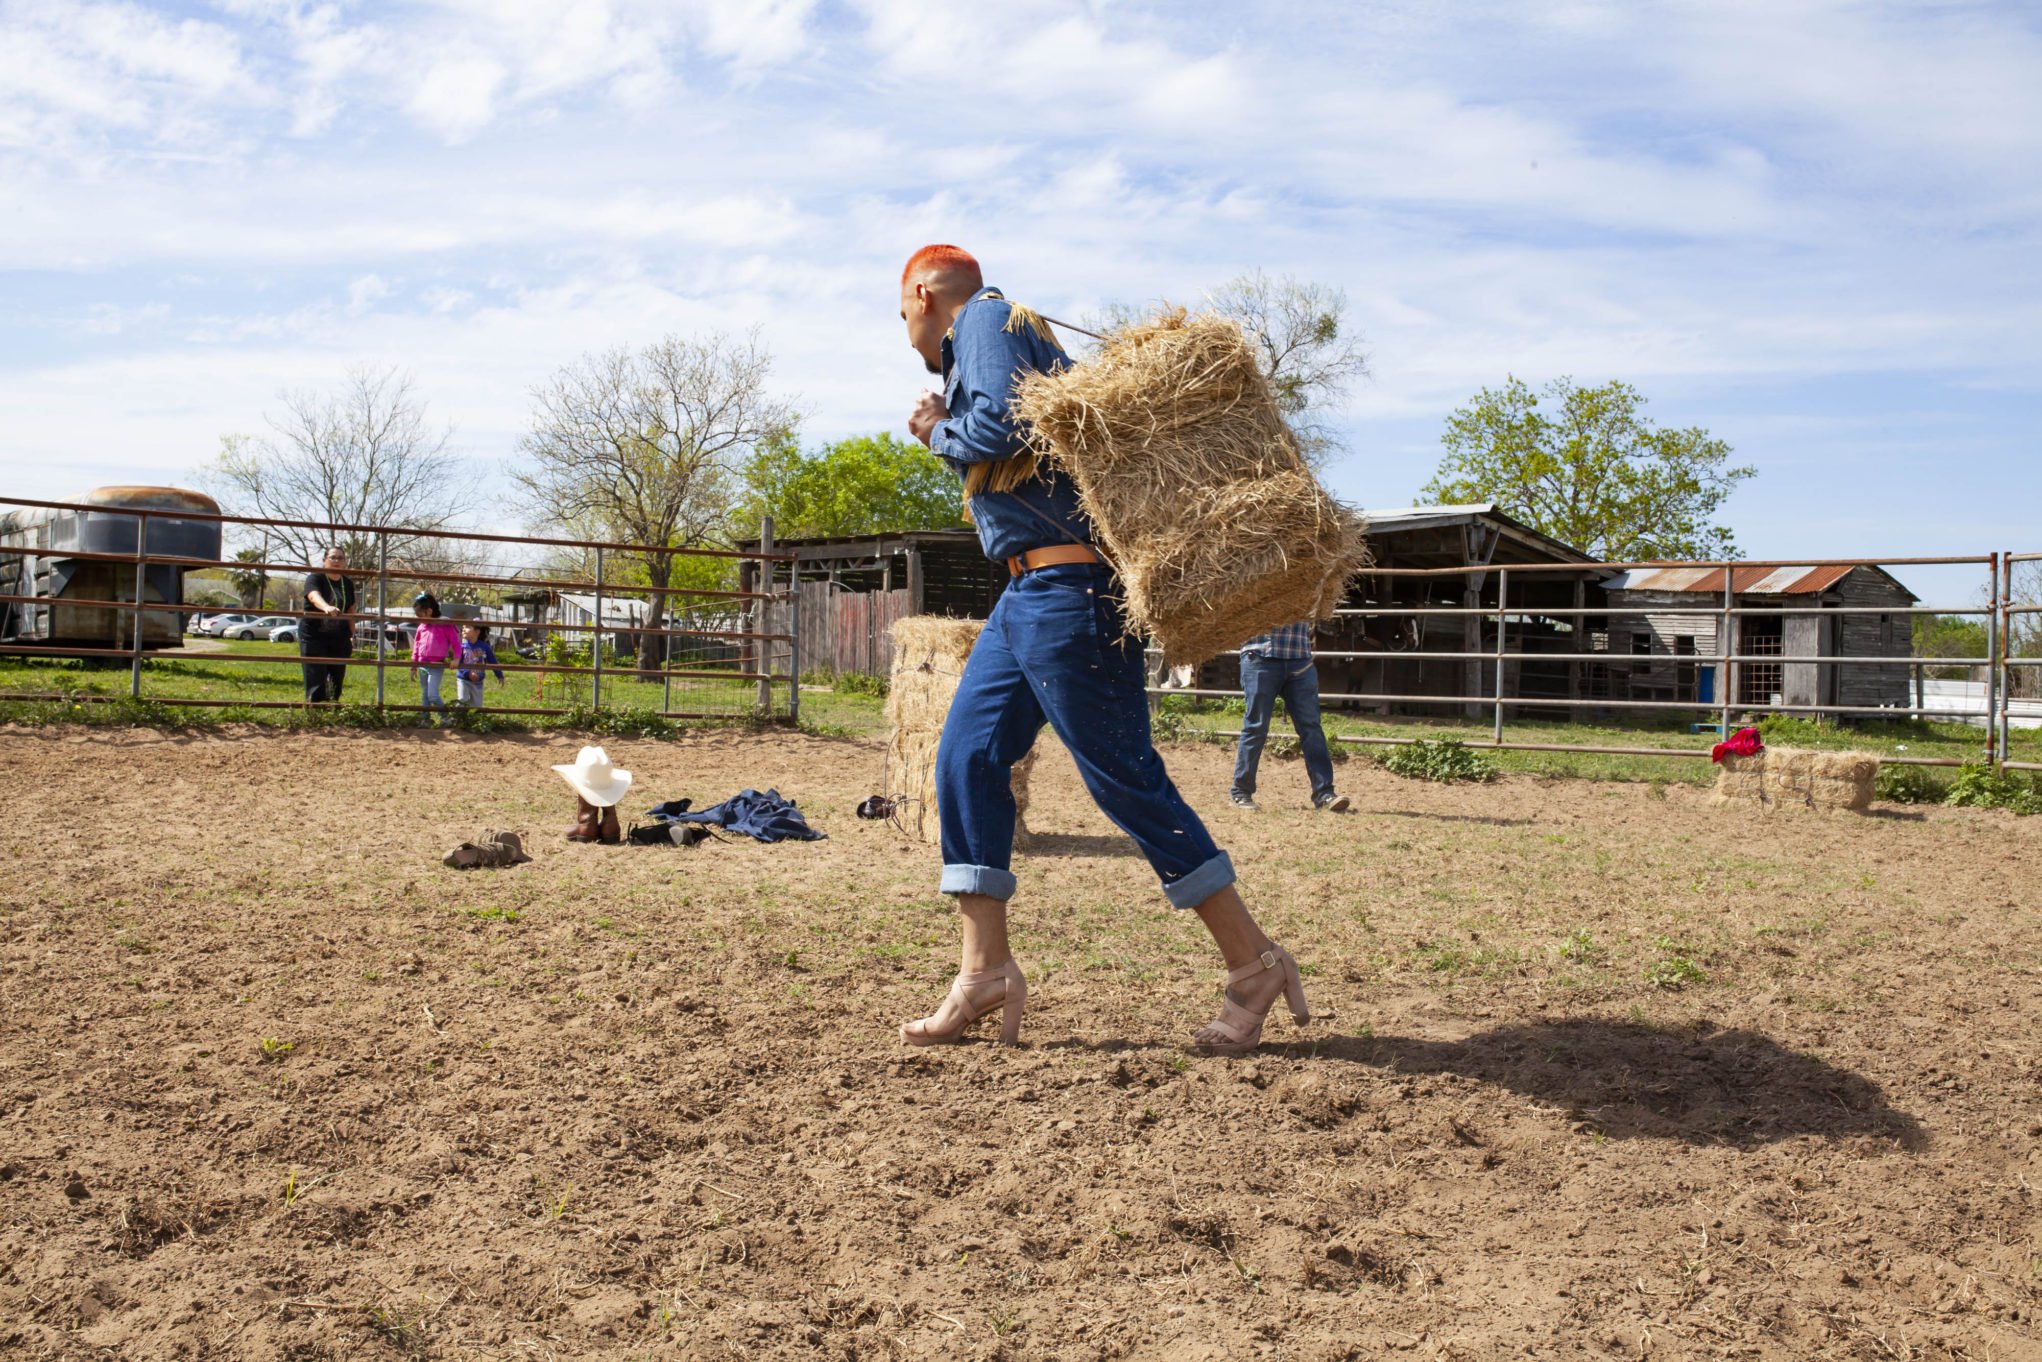 Jose Villalobos' installation A Las Escondidas (2019). The photo shows the artist carrying bales of hay on his back while wearing high heels.